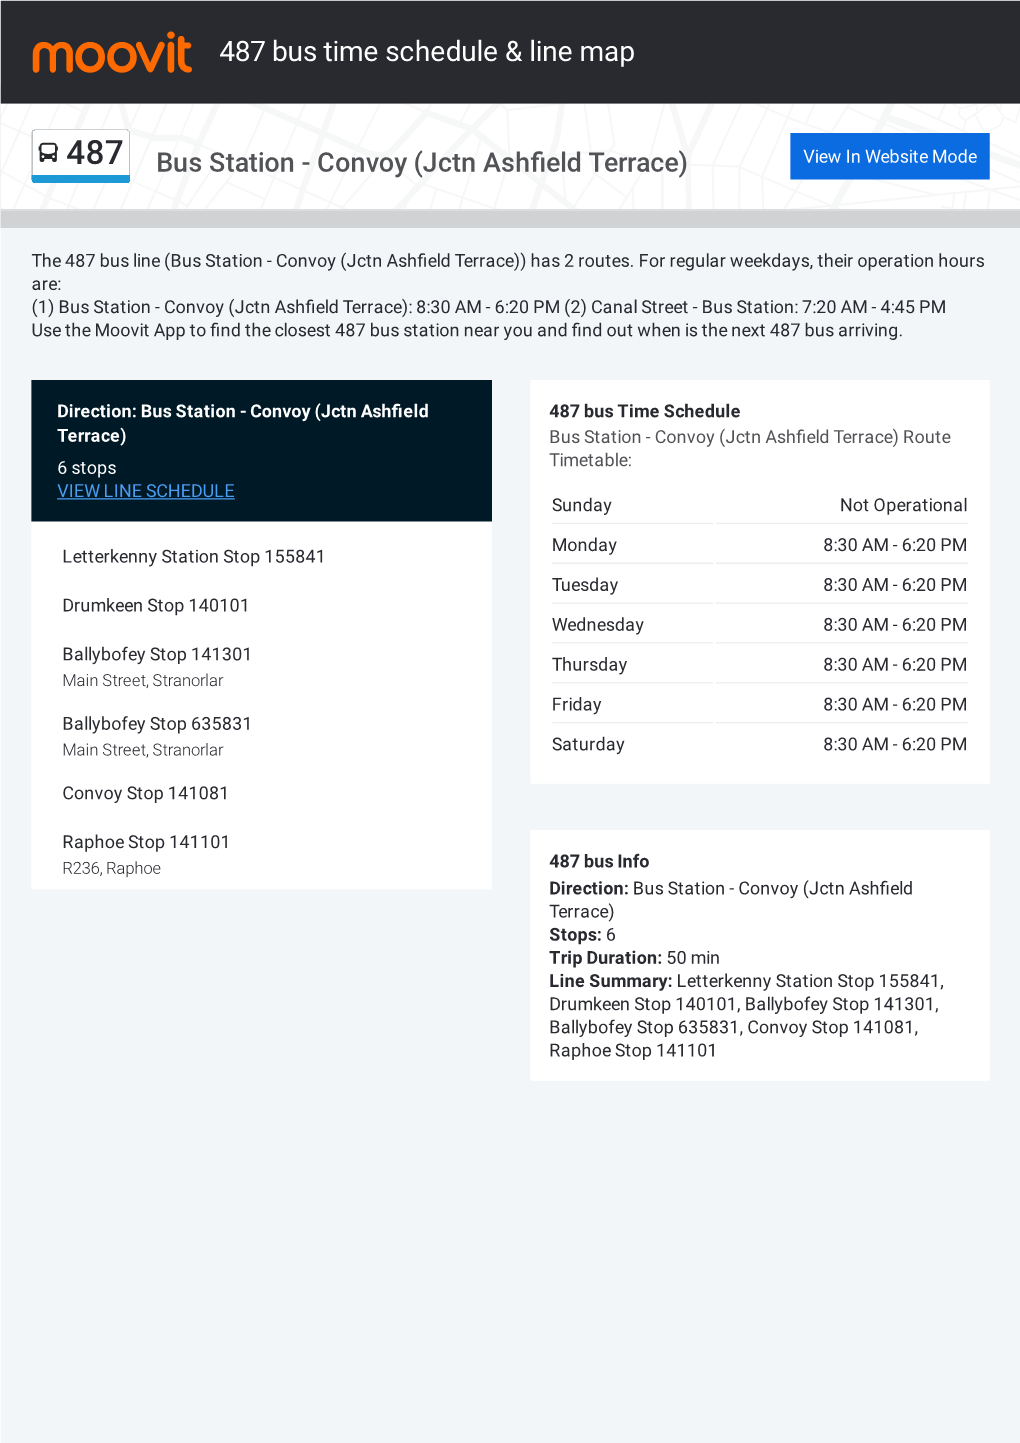 487 Bus Time Schedule & Line Route